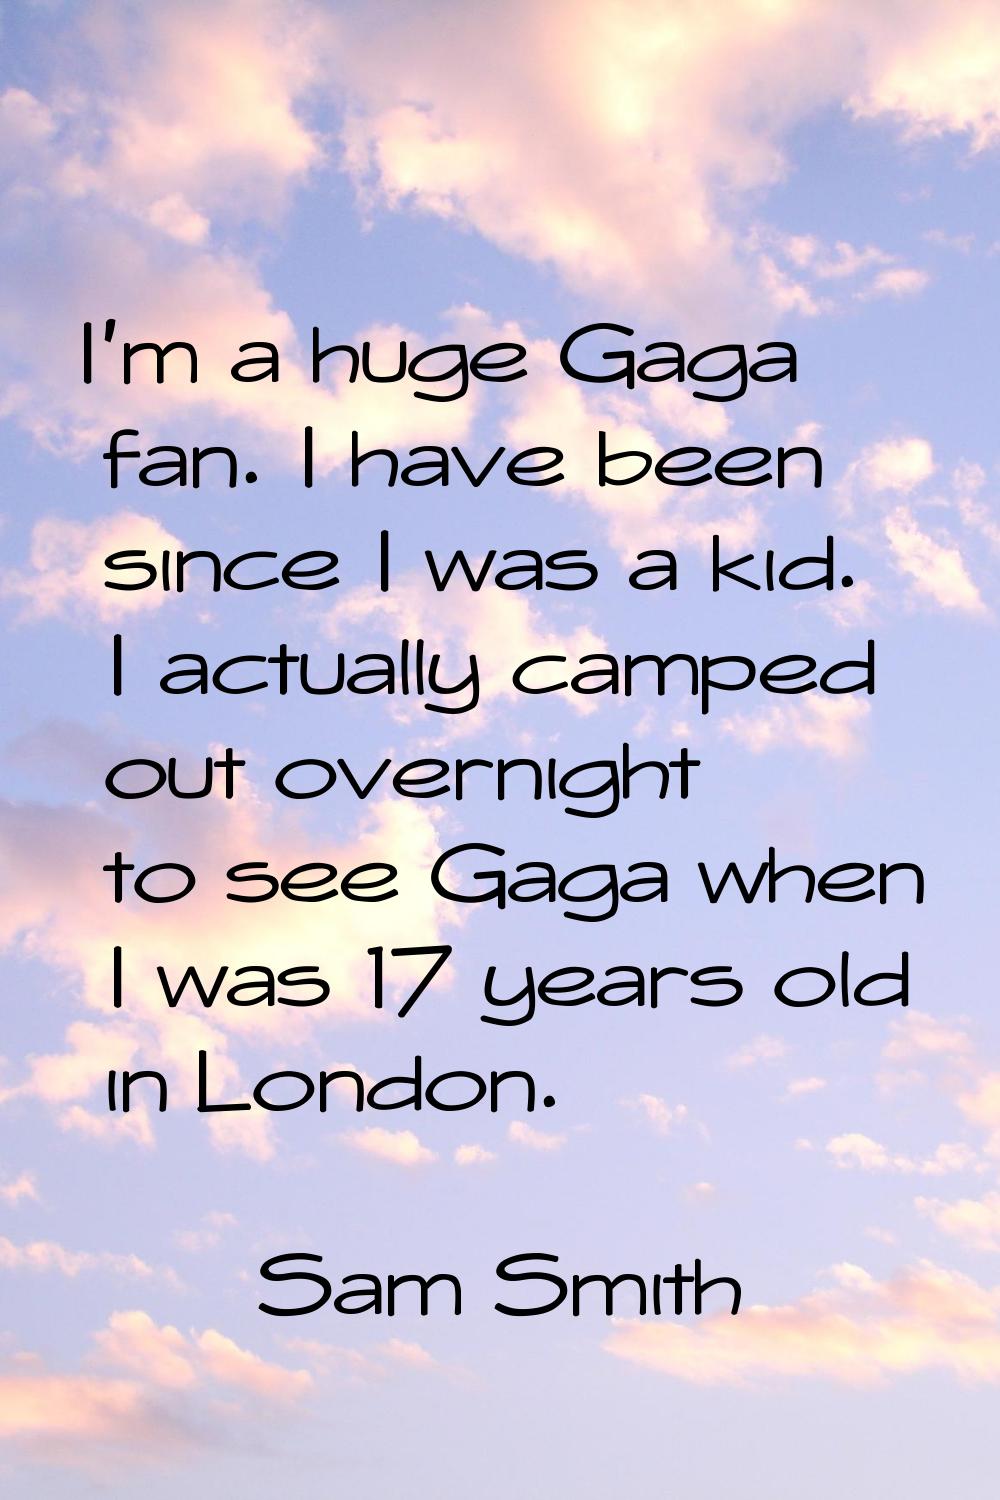 I'm a huge Gaga fan. I have been since I was a kid. I actually camped out overnight to see Gaga whe